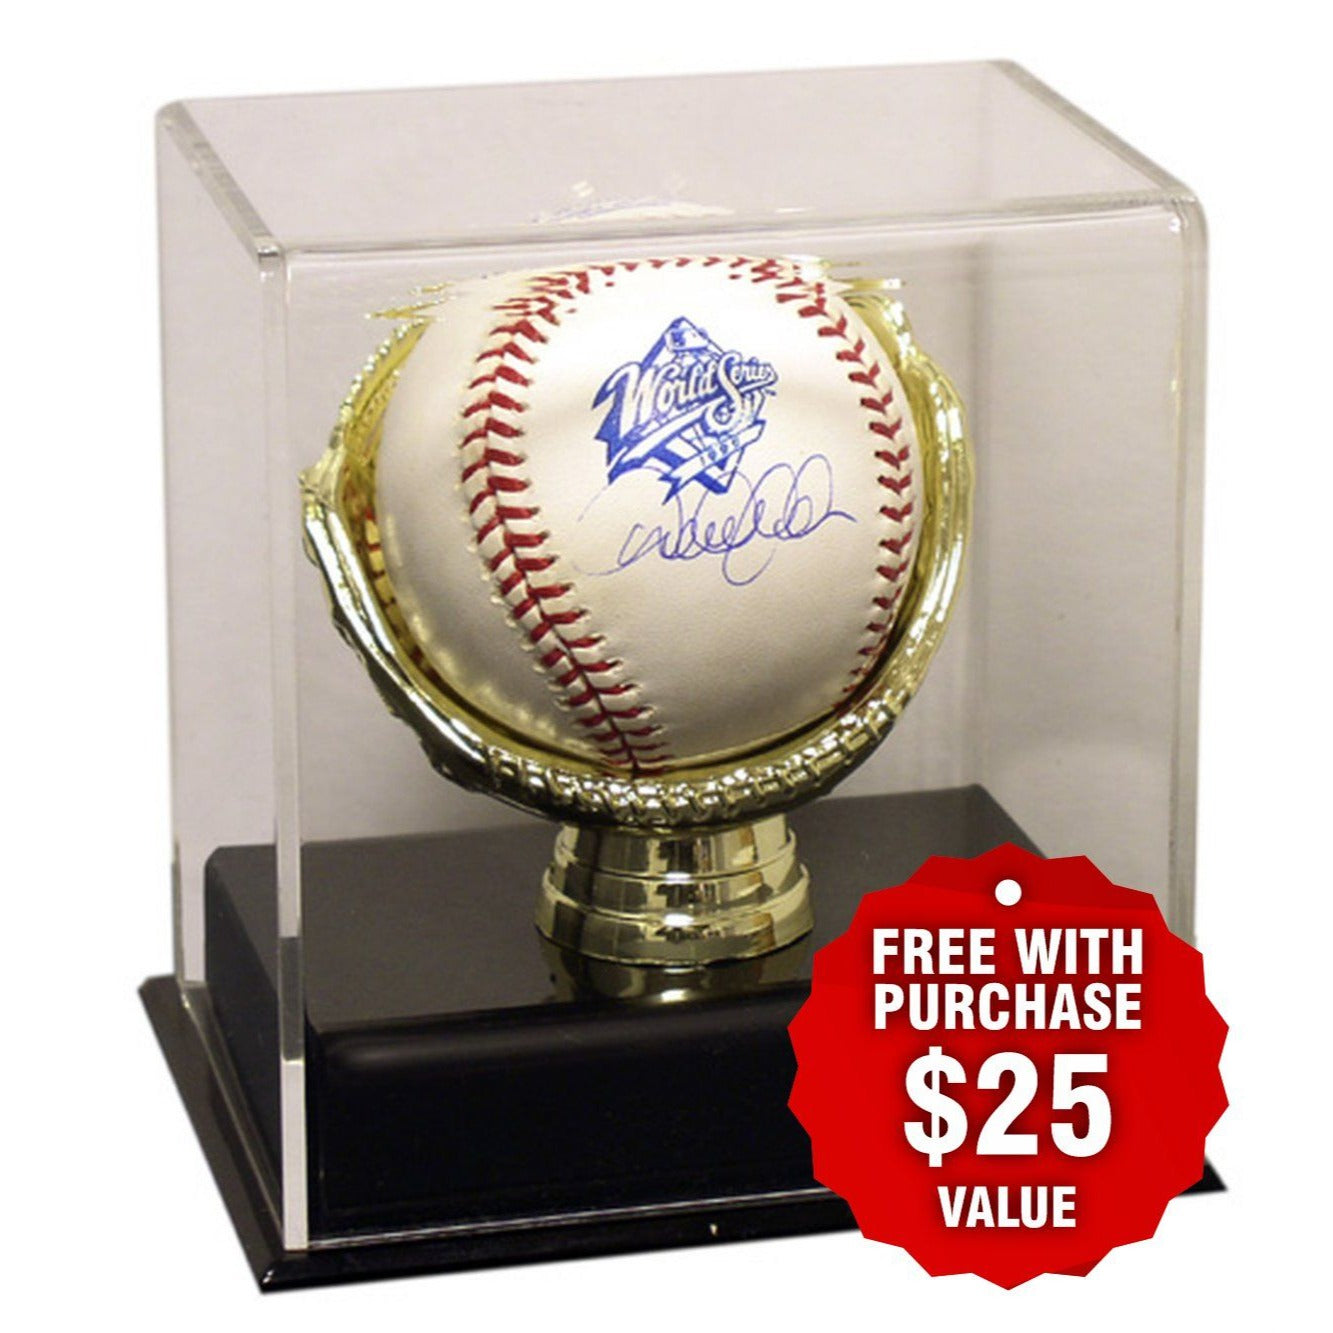 Shohei Otani Mike Trout Rawlings official Major League Baseball signed with proof with free case